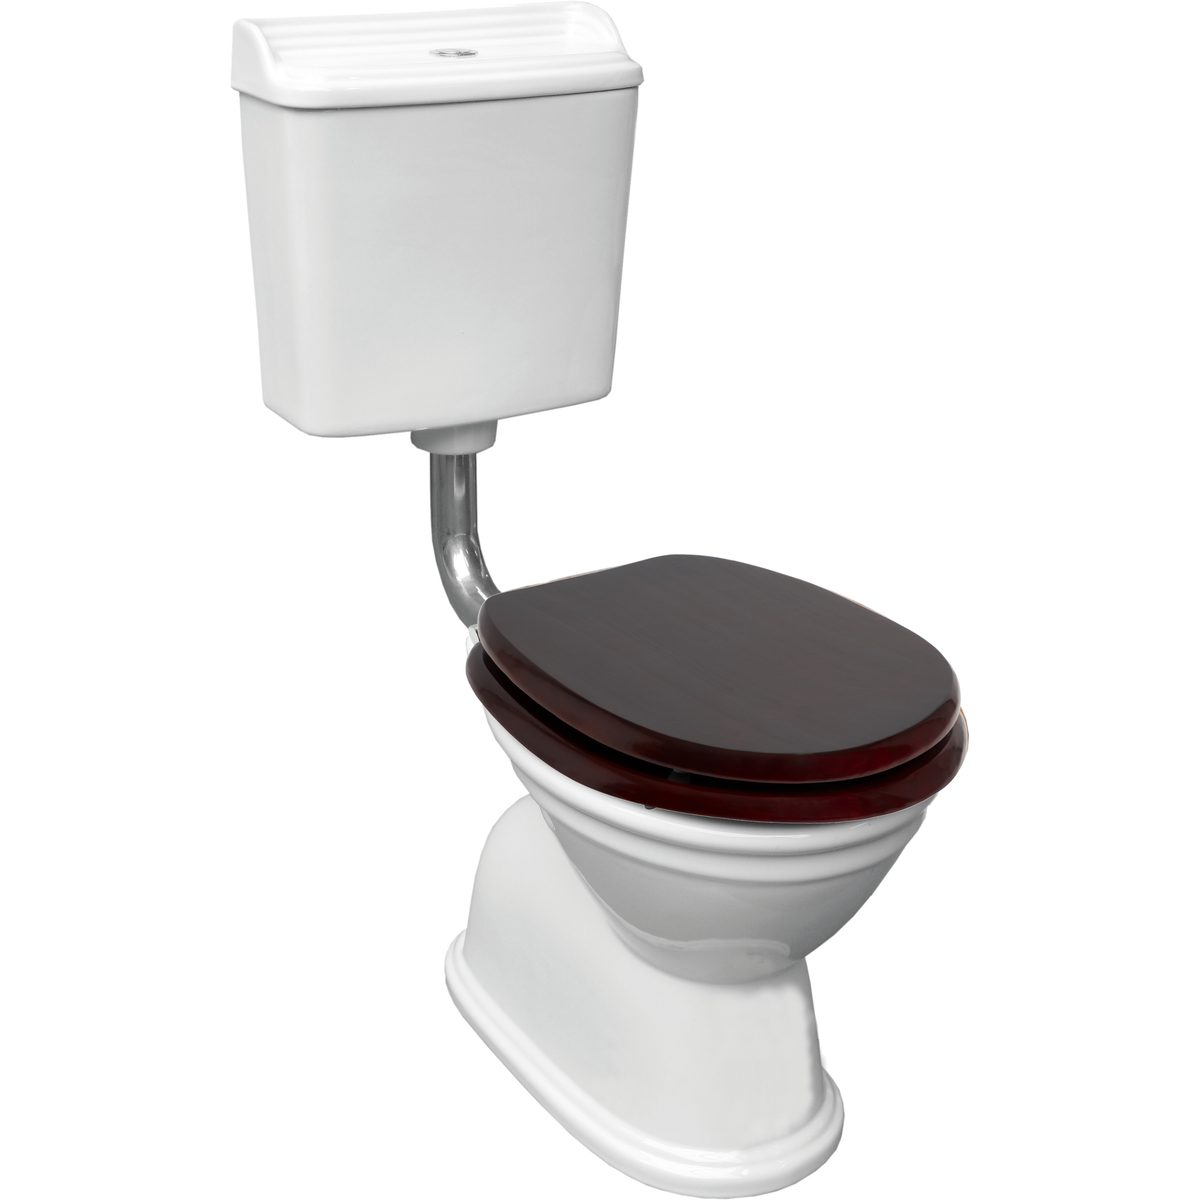 Colonial Feature S Trap Toilet Suite, Mahogany Seat